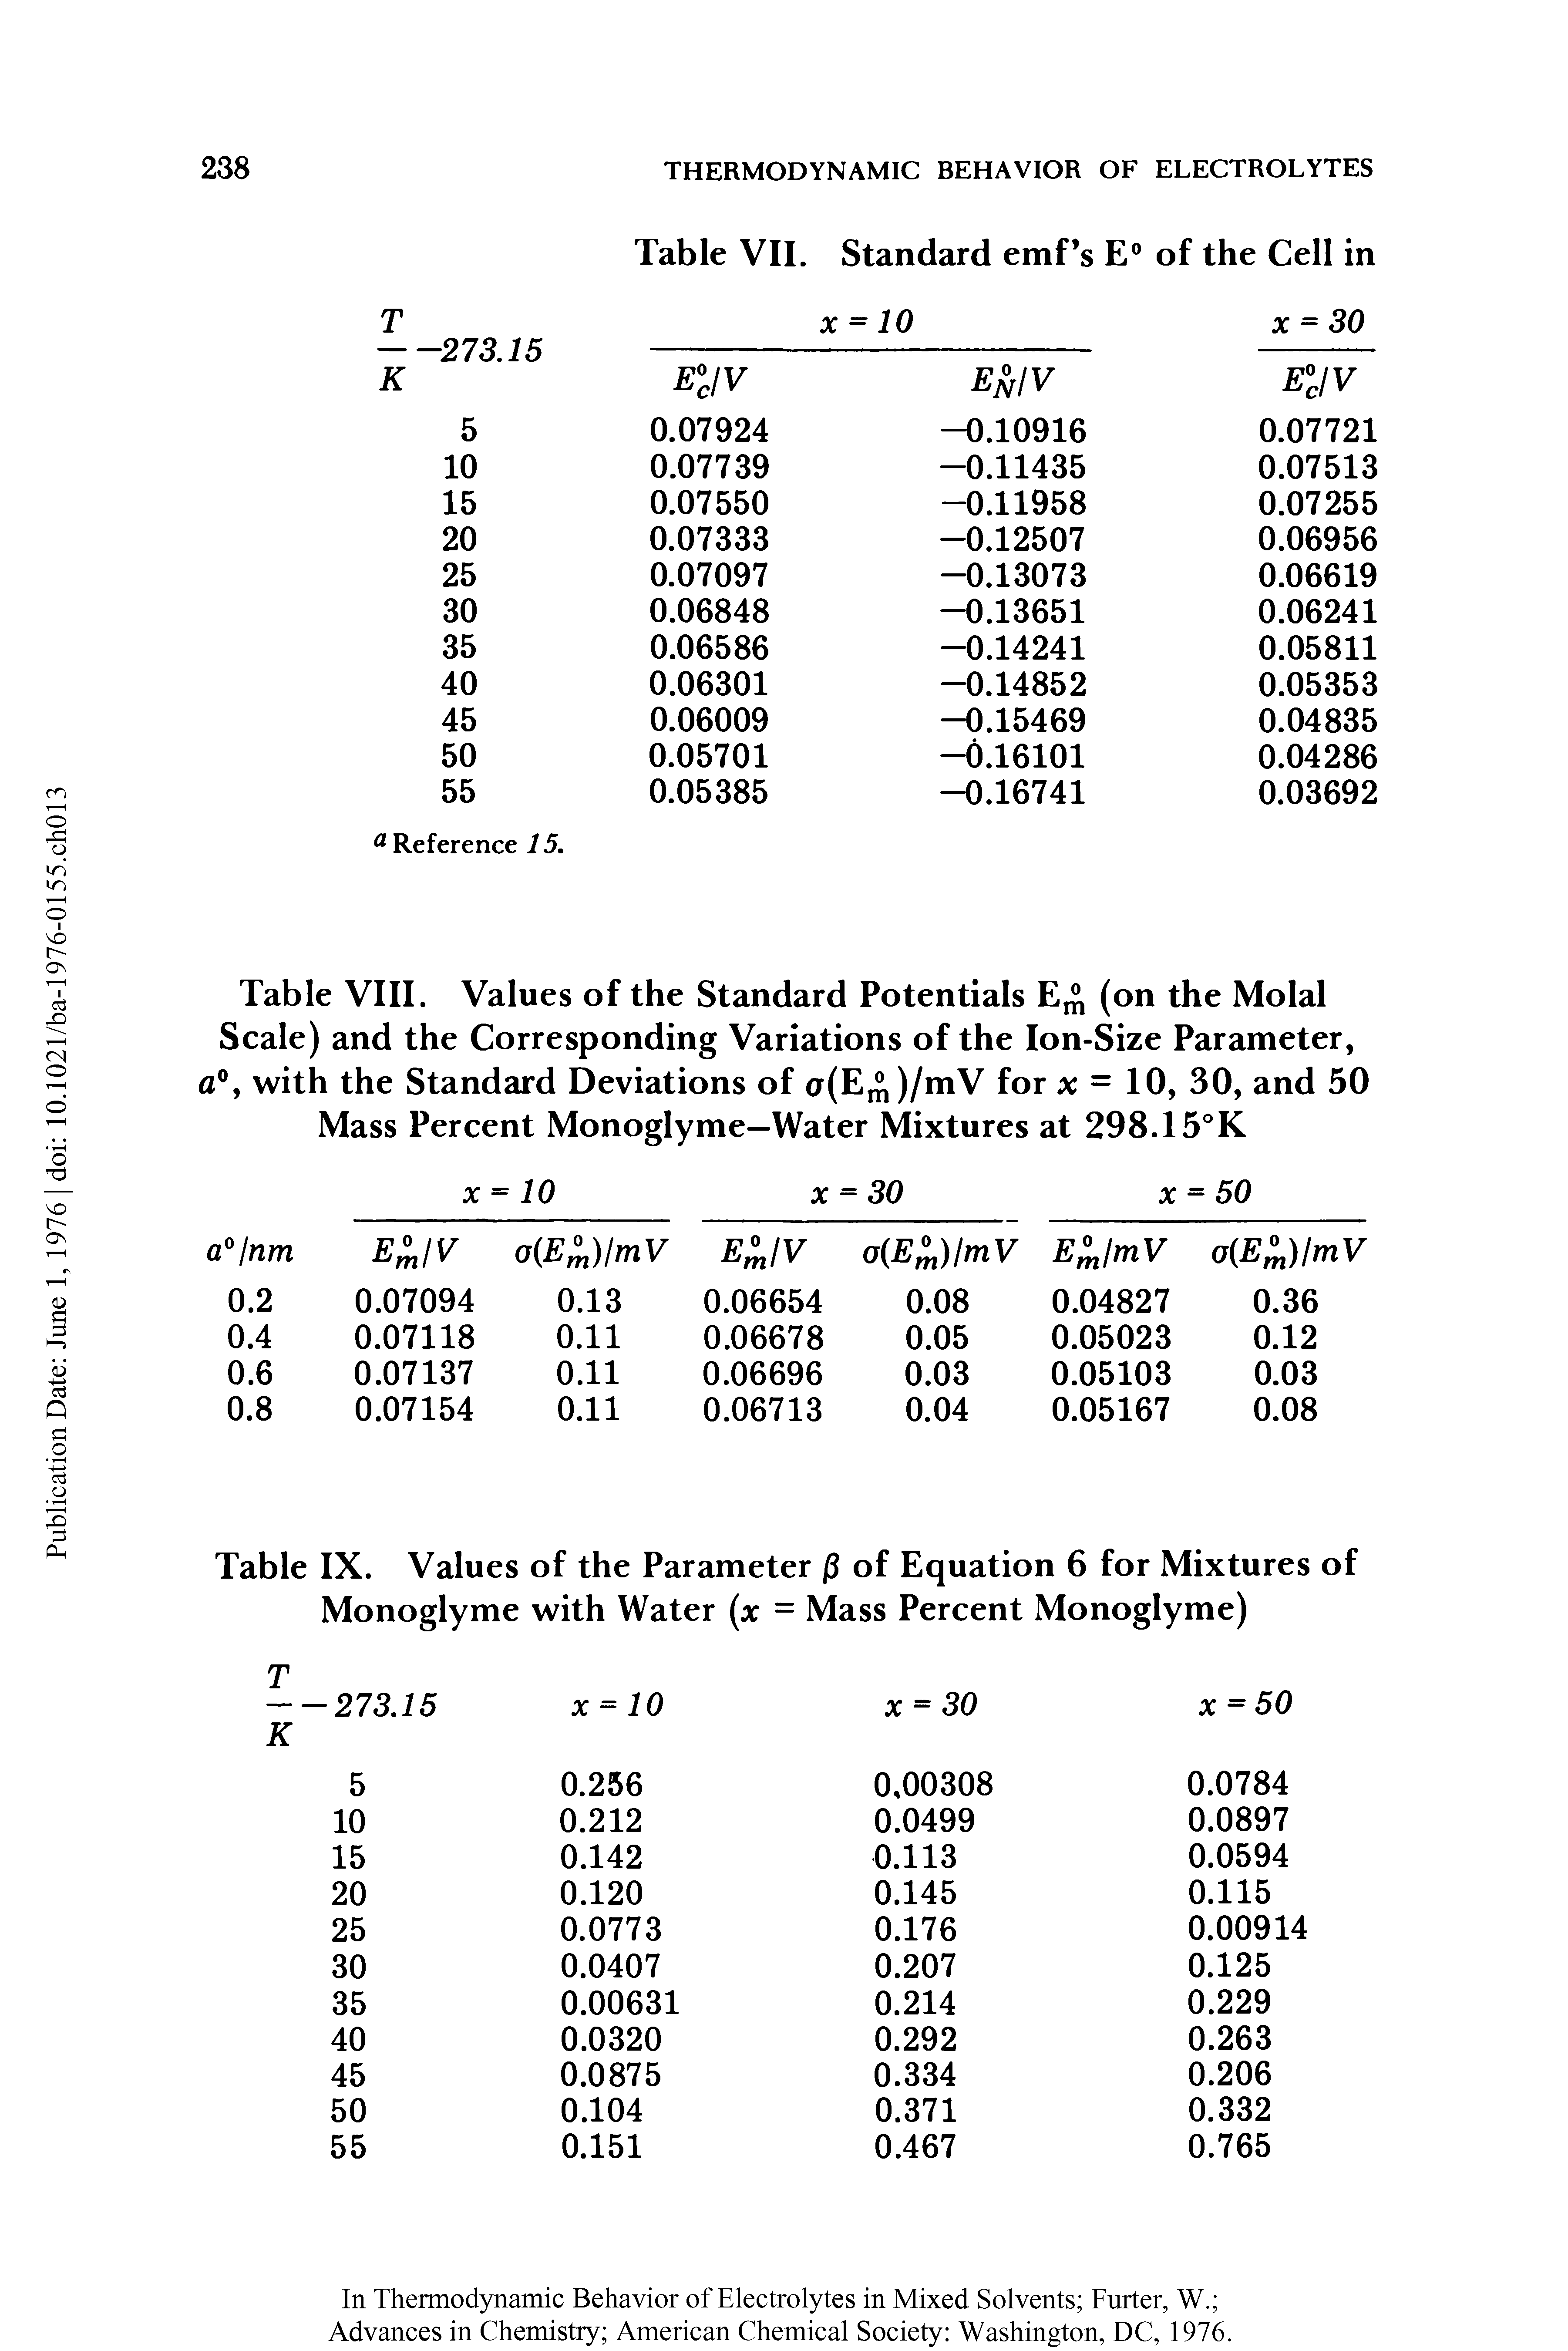 Table VIII. Values of the Standard Potentials (on the Molal Scale) and the Corresponding Variations of the Ion-Size Parameter, a0, with the Standard Deviations of a(EIJl)/mV for x = 10, 30, and 50 Mass Percent Monoglyme—Water Mixtures at 298.15°K...